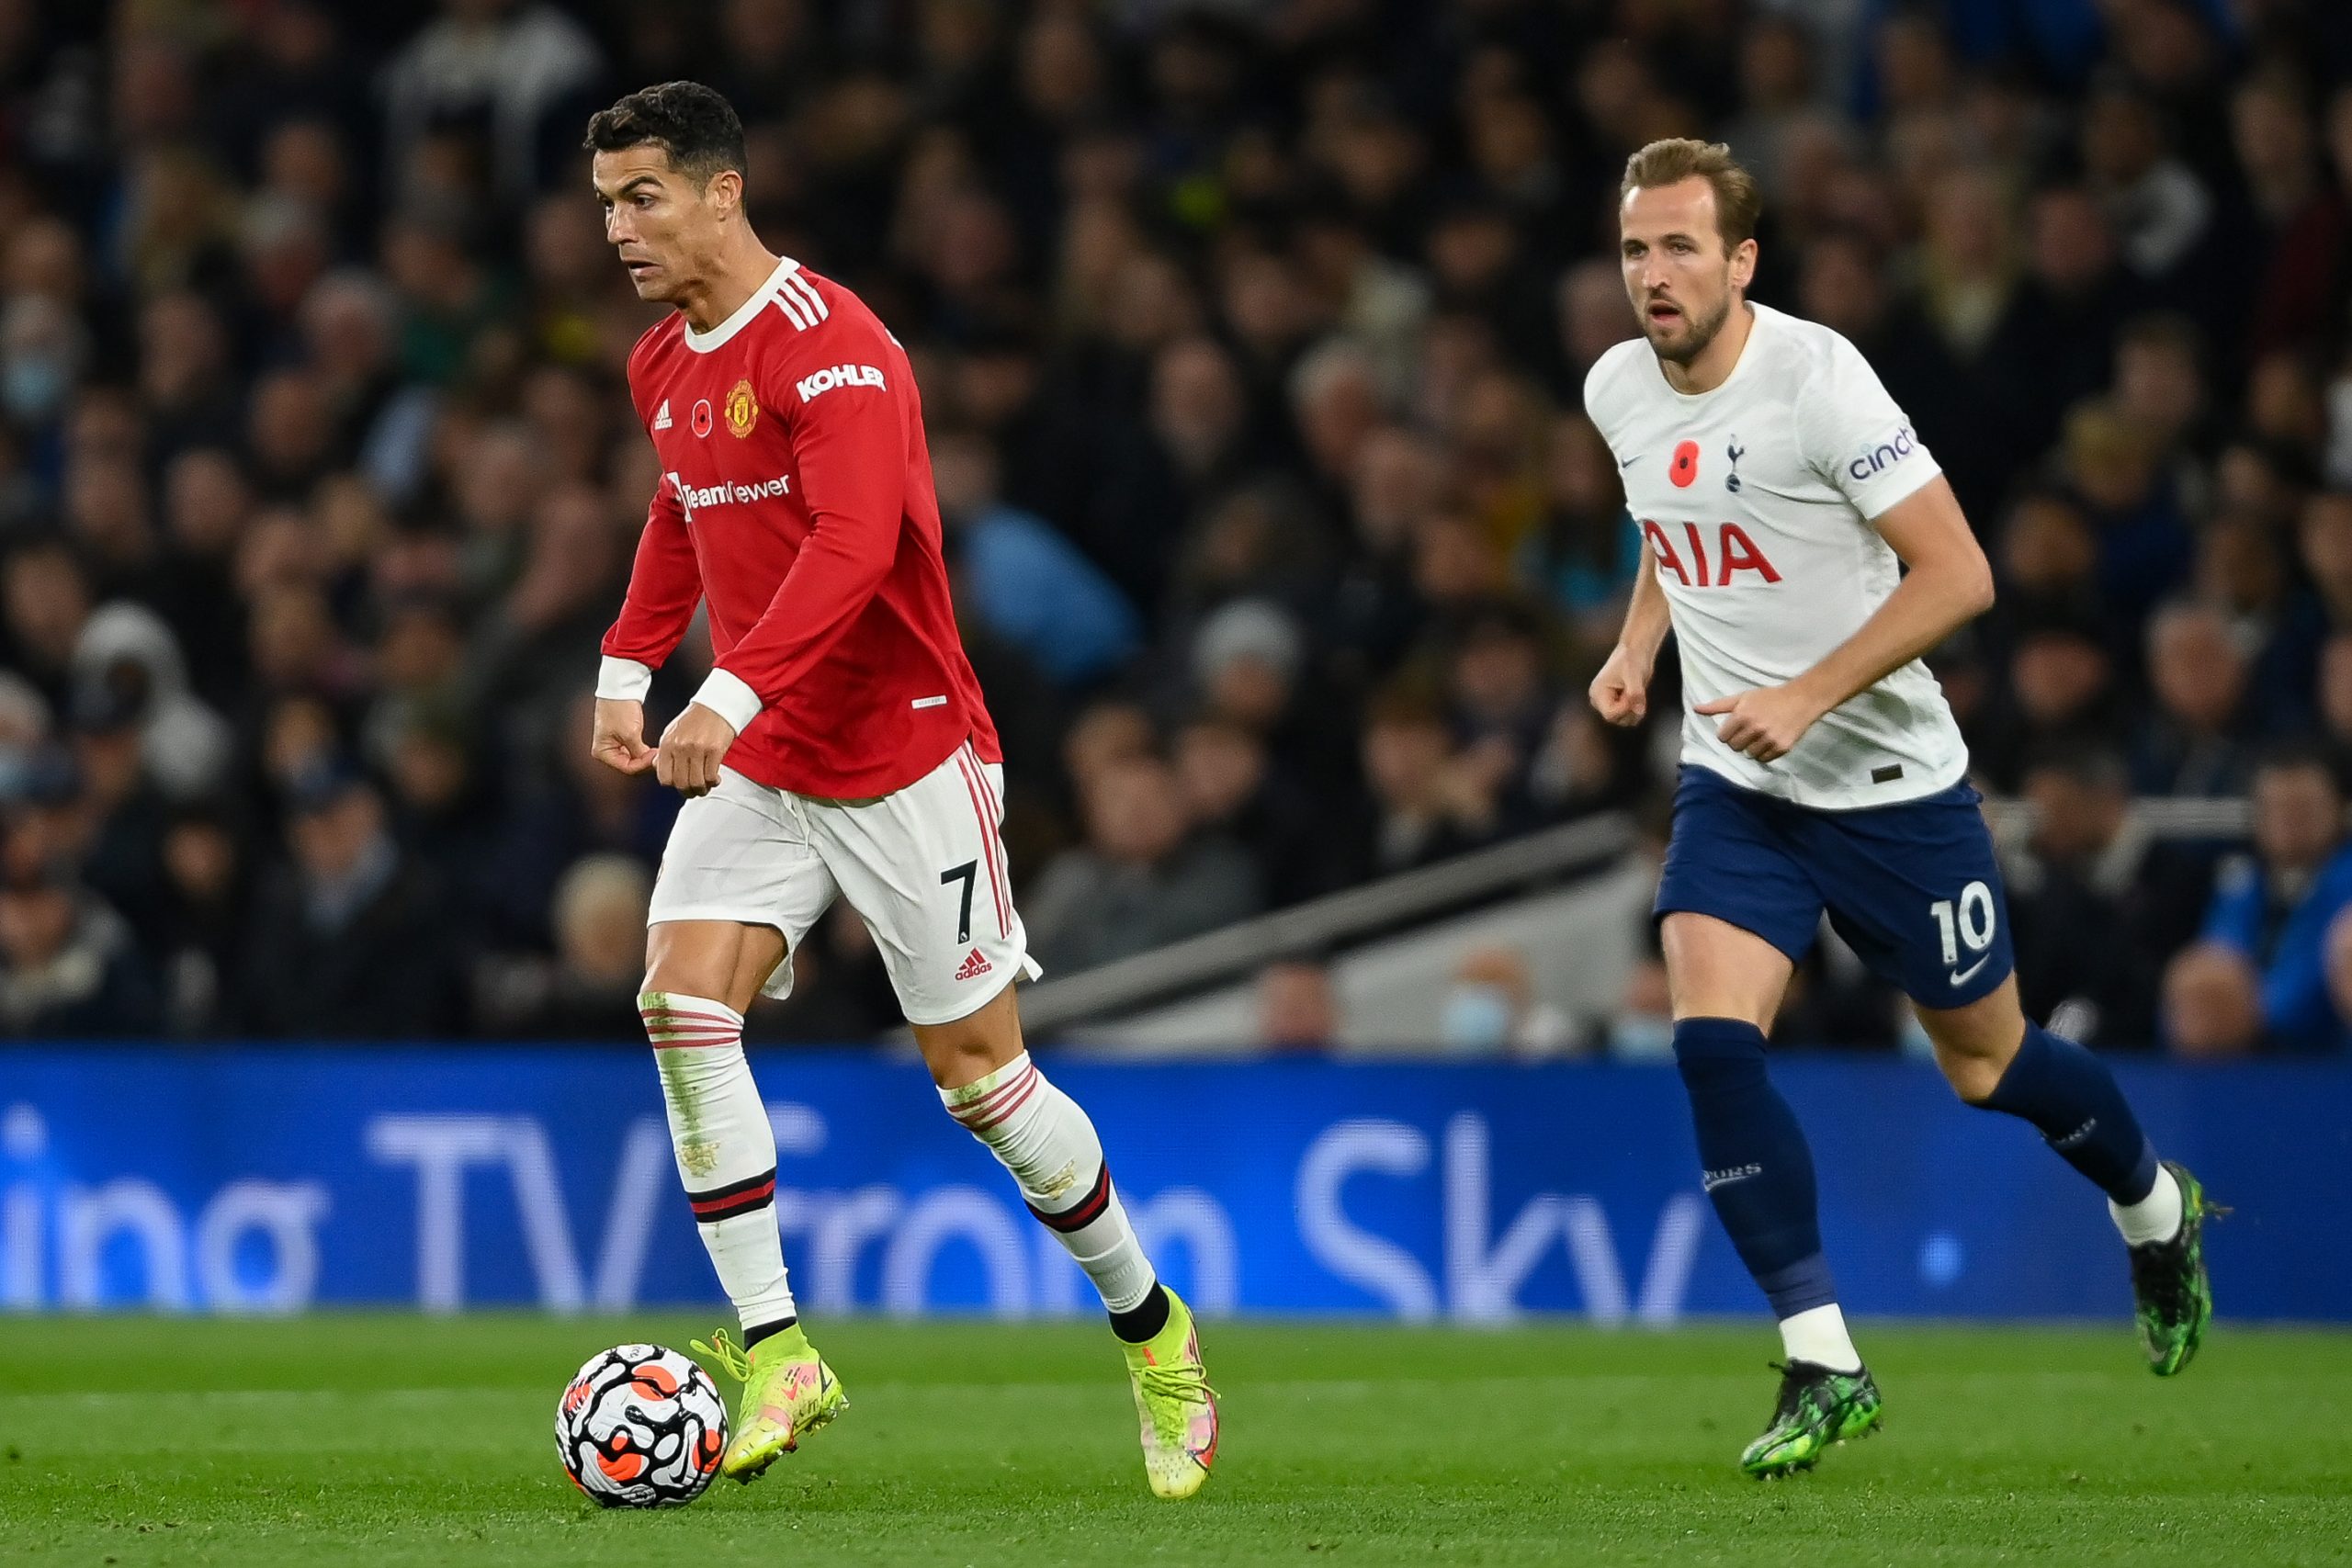 Cristiano Ronaldo of Manchester United is chased by Harry Kane of Tottenham Hotspur.